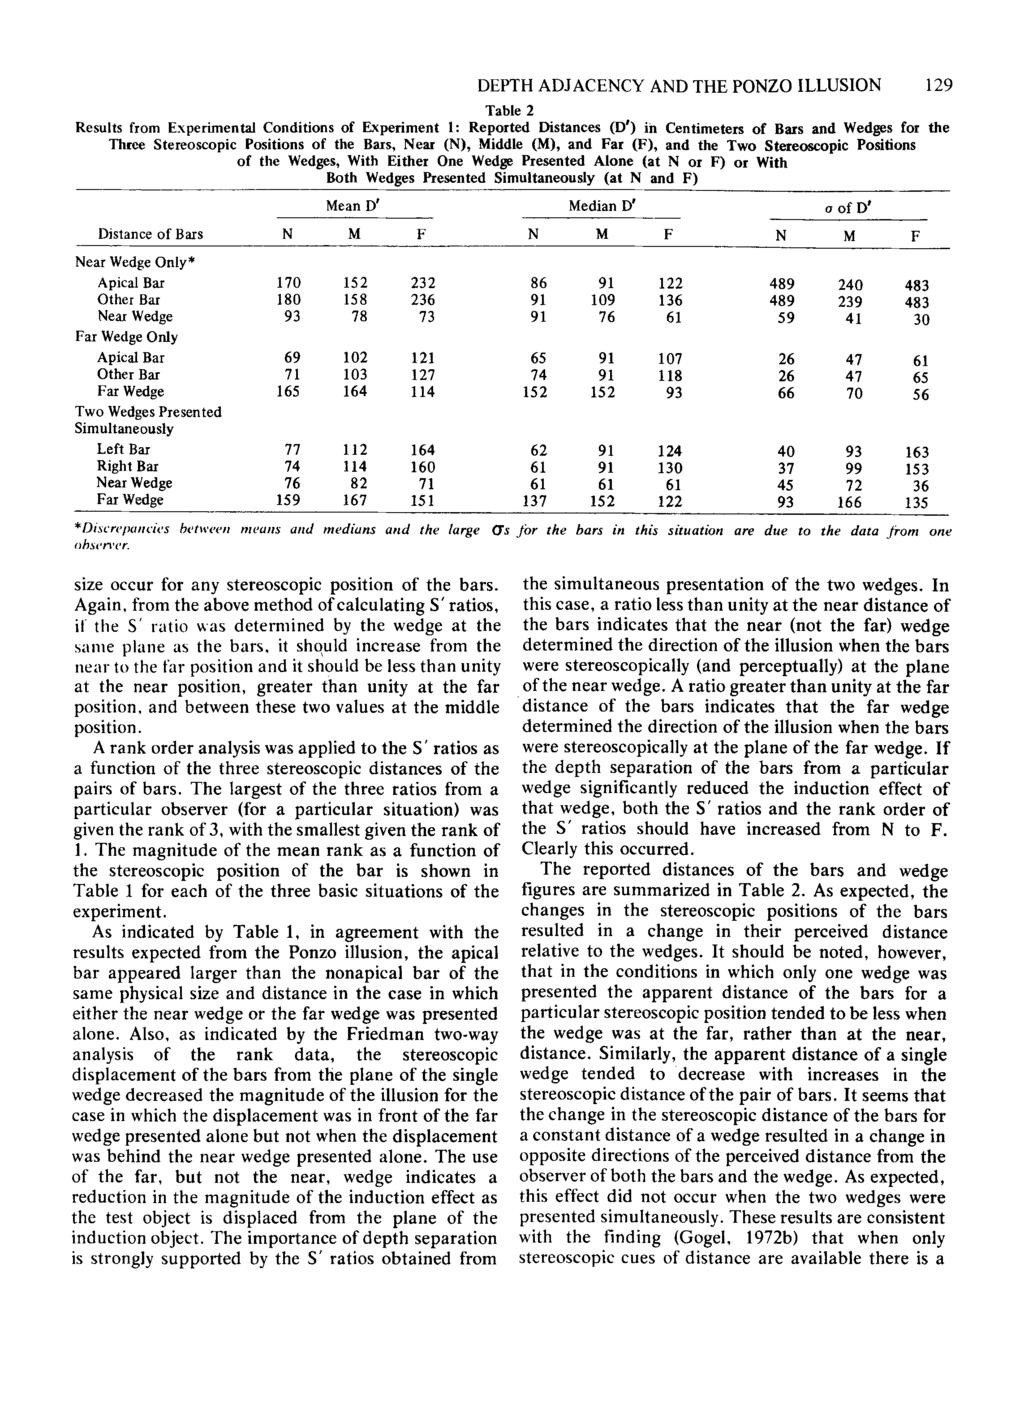 DEPTH ADJACENCY AND THE PONZO LLUSON 129 Table 2 Results from Experimental Conditions of Experiment 1: Reported Distances (D') iii Centimeters of Bars and Wedges for the Three Stereoscopic Positions